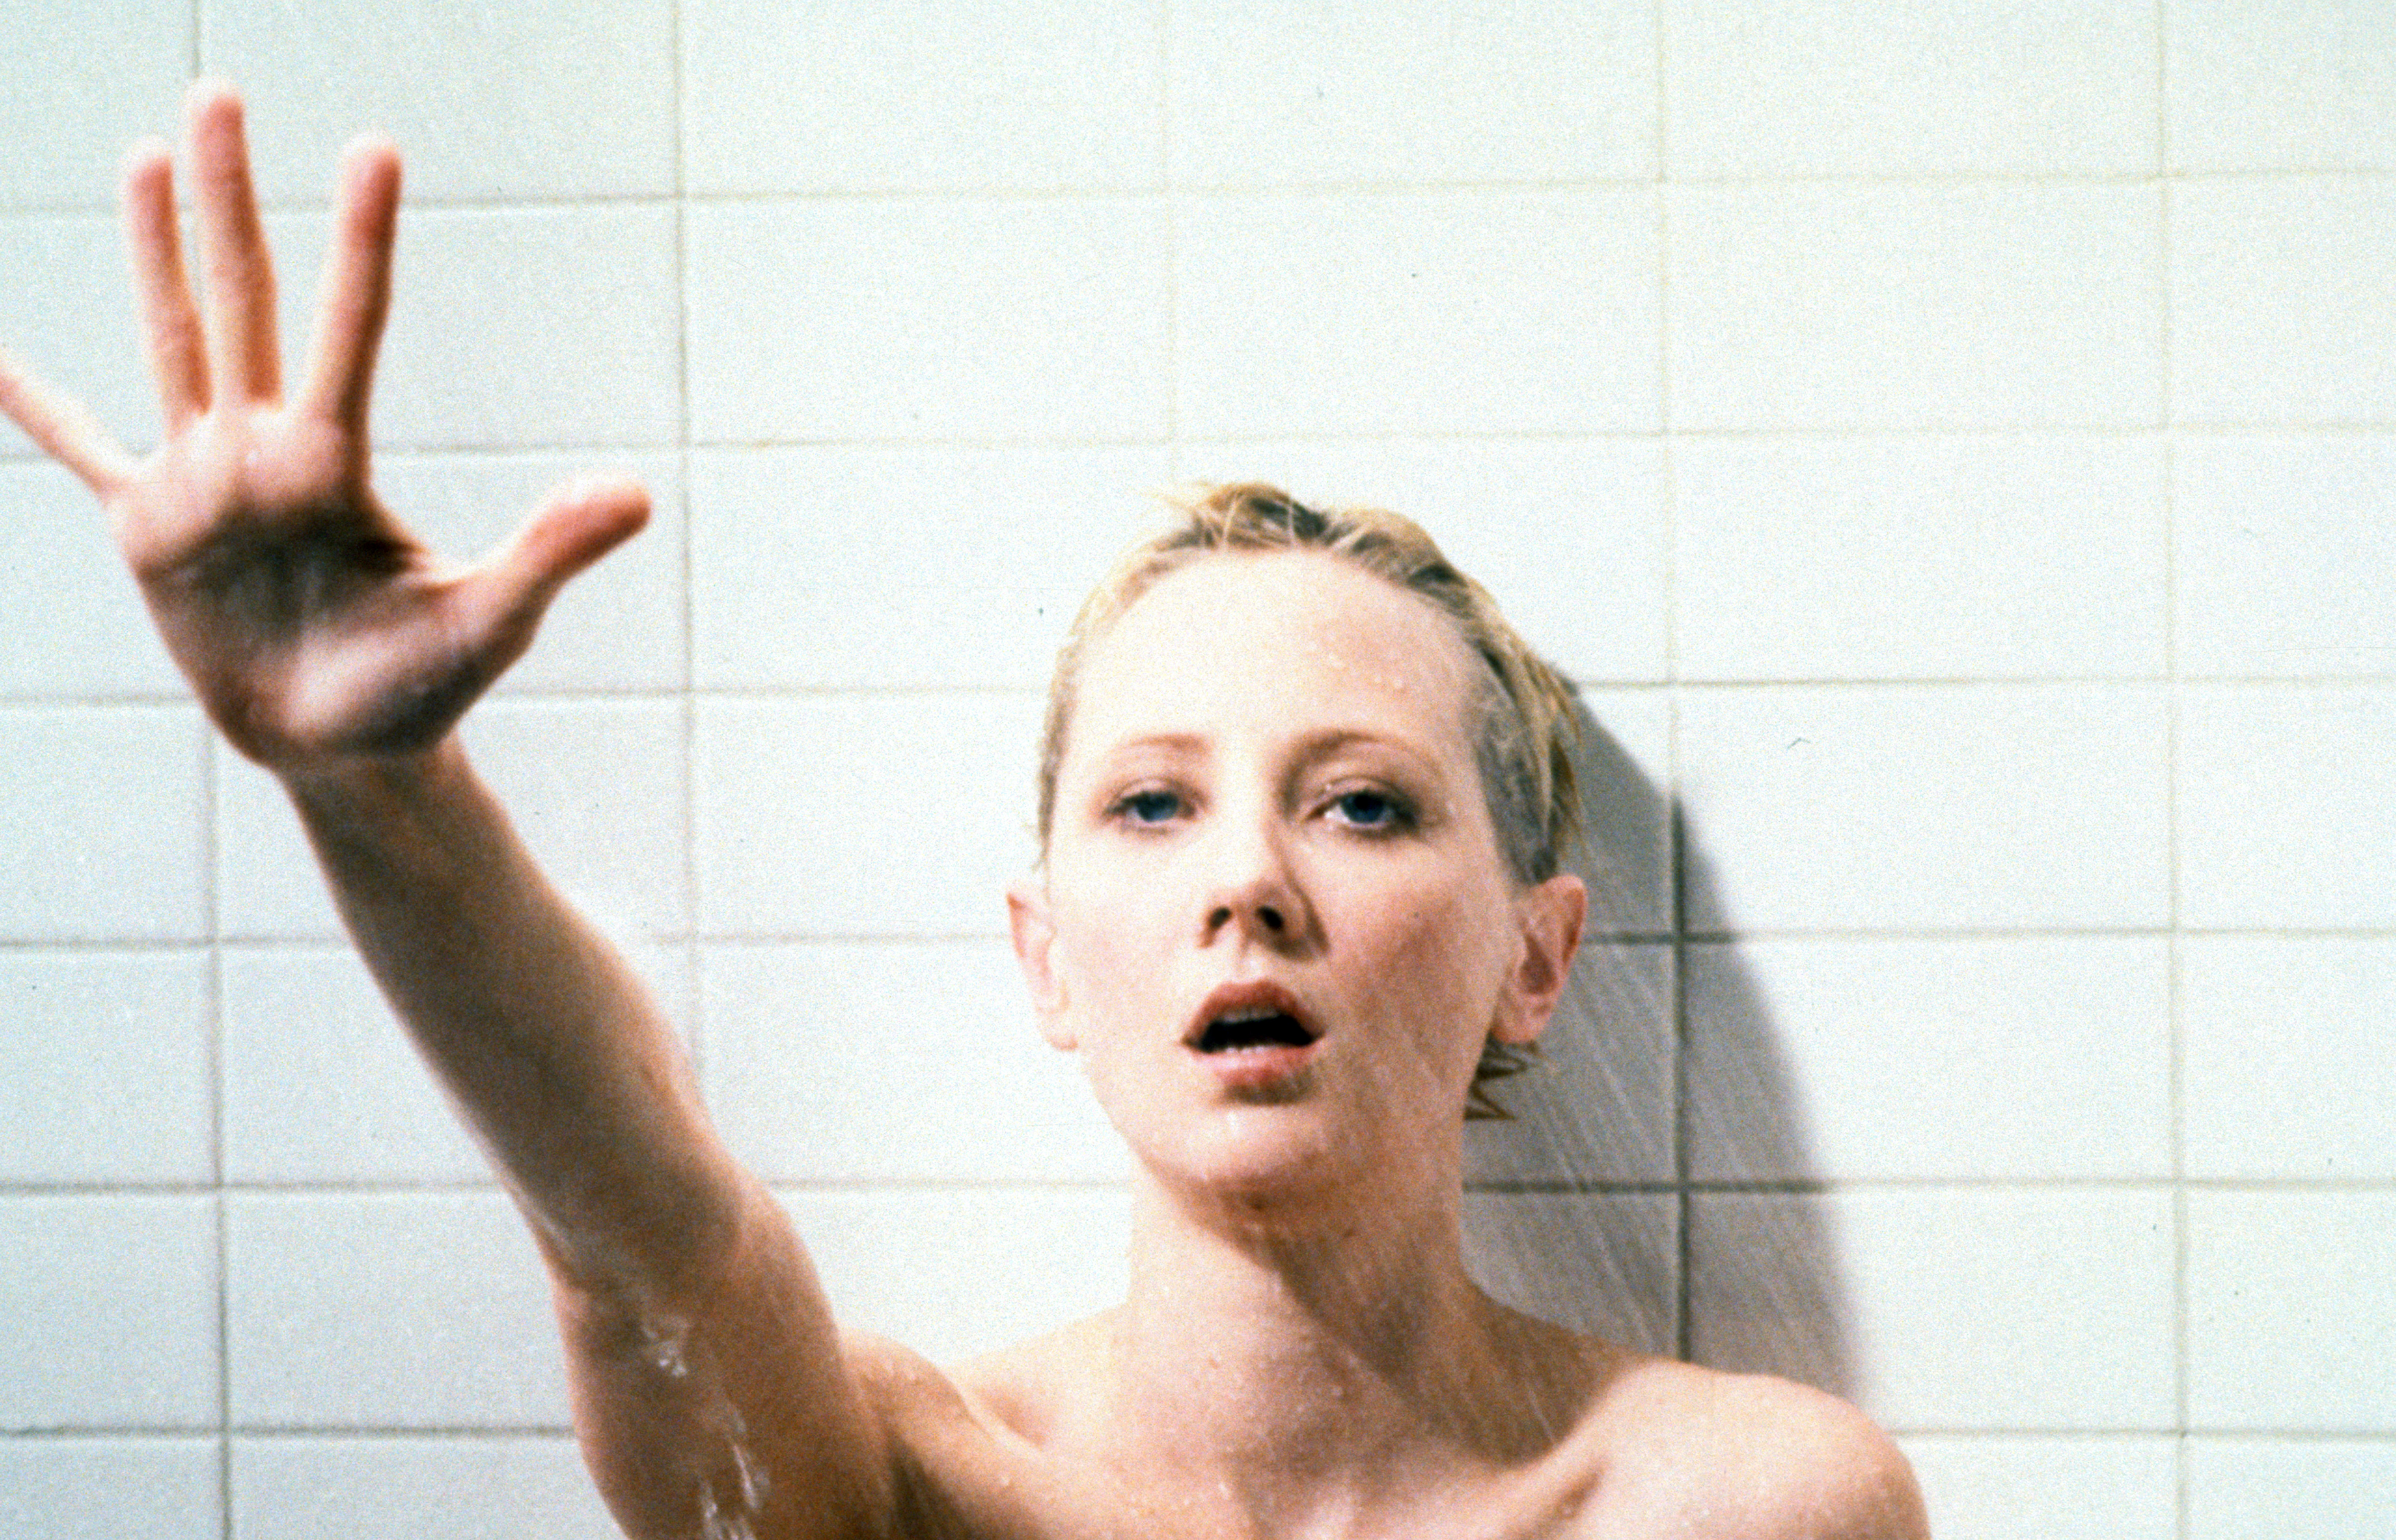 Anne Heche stands in a shower in a scene from the film "Psycho" circa 1998. | Source: Getty Images